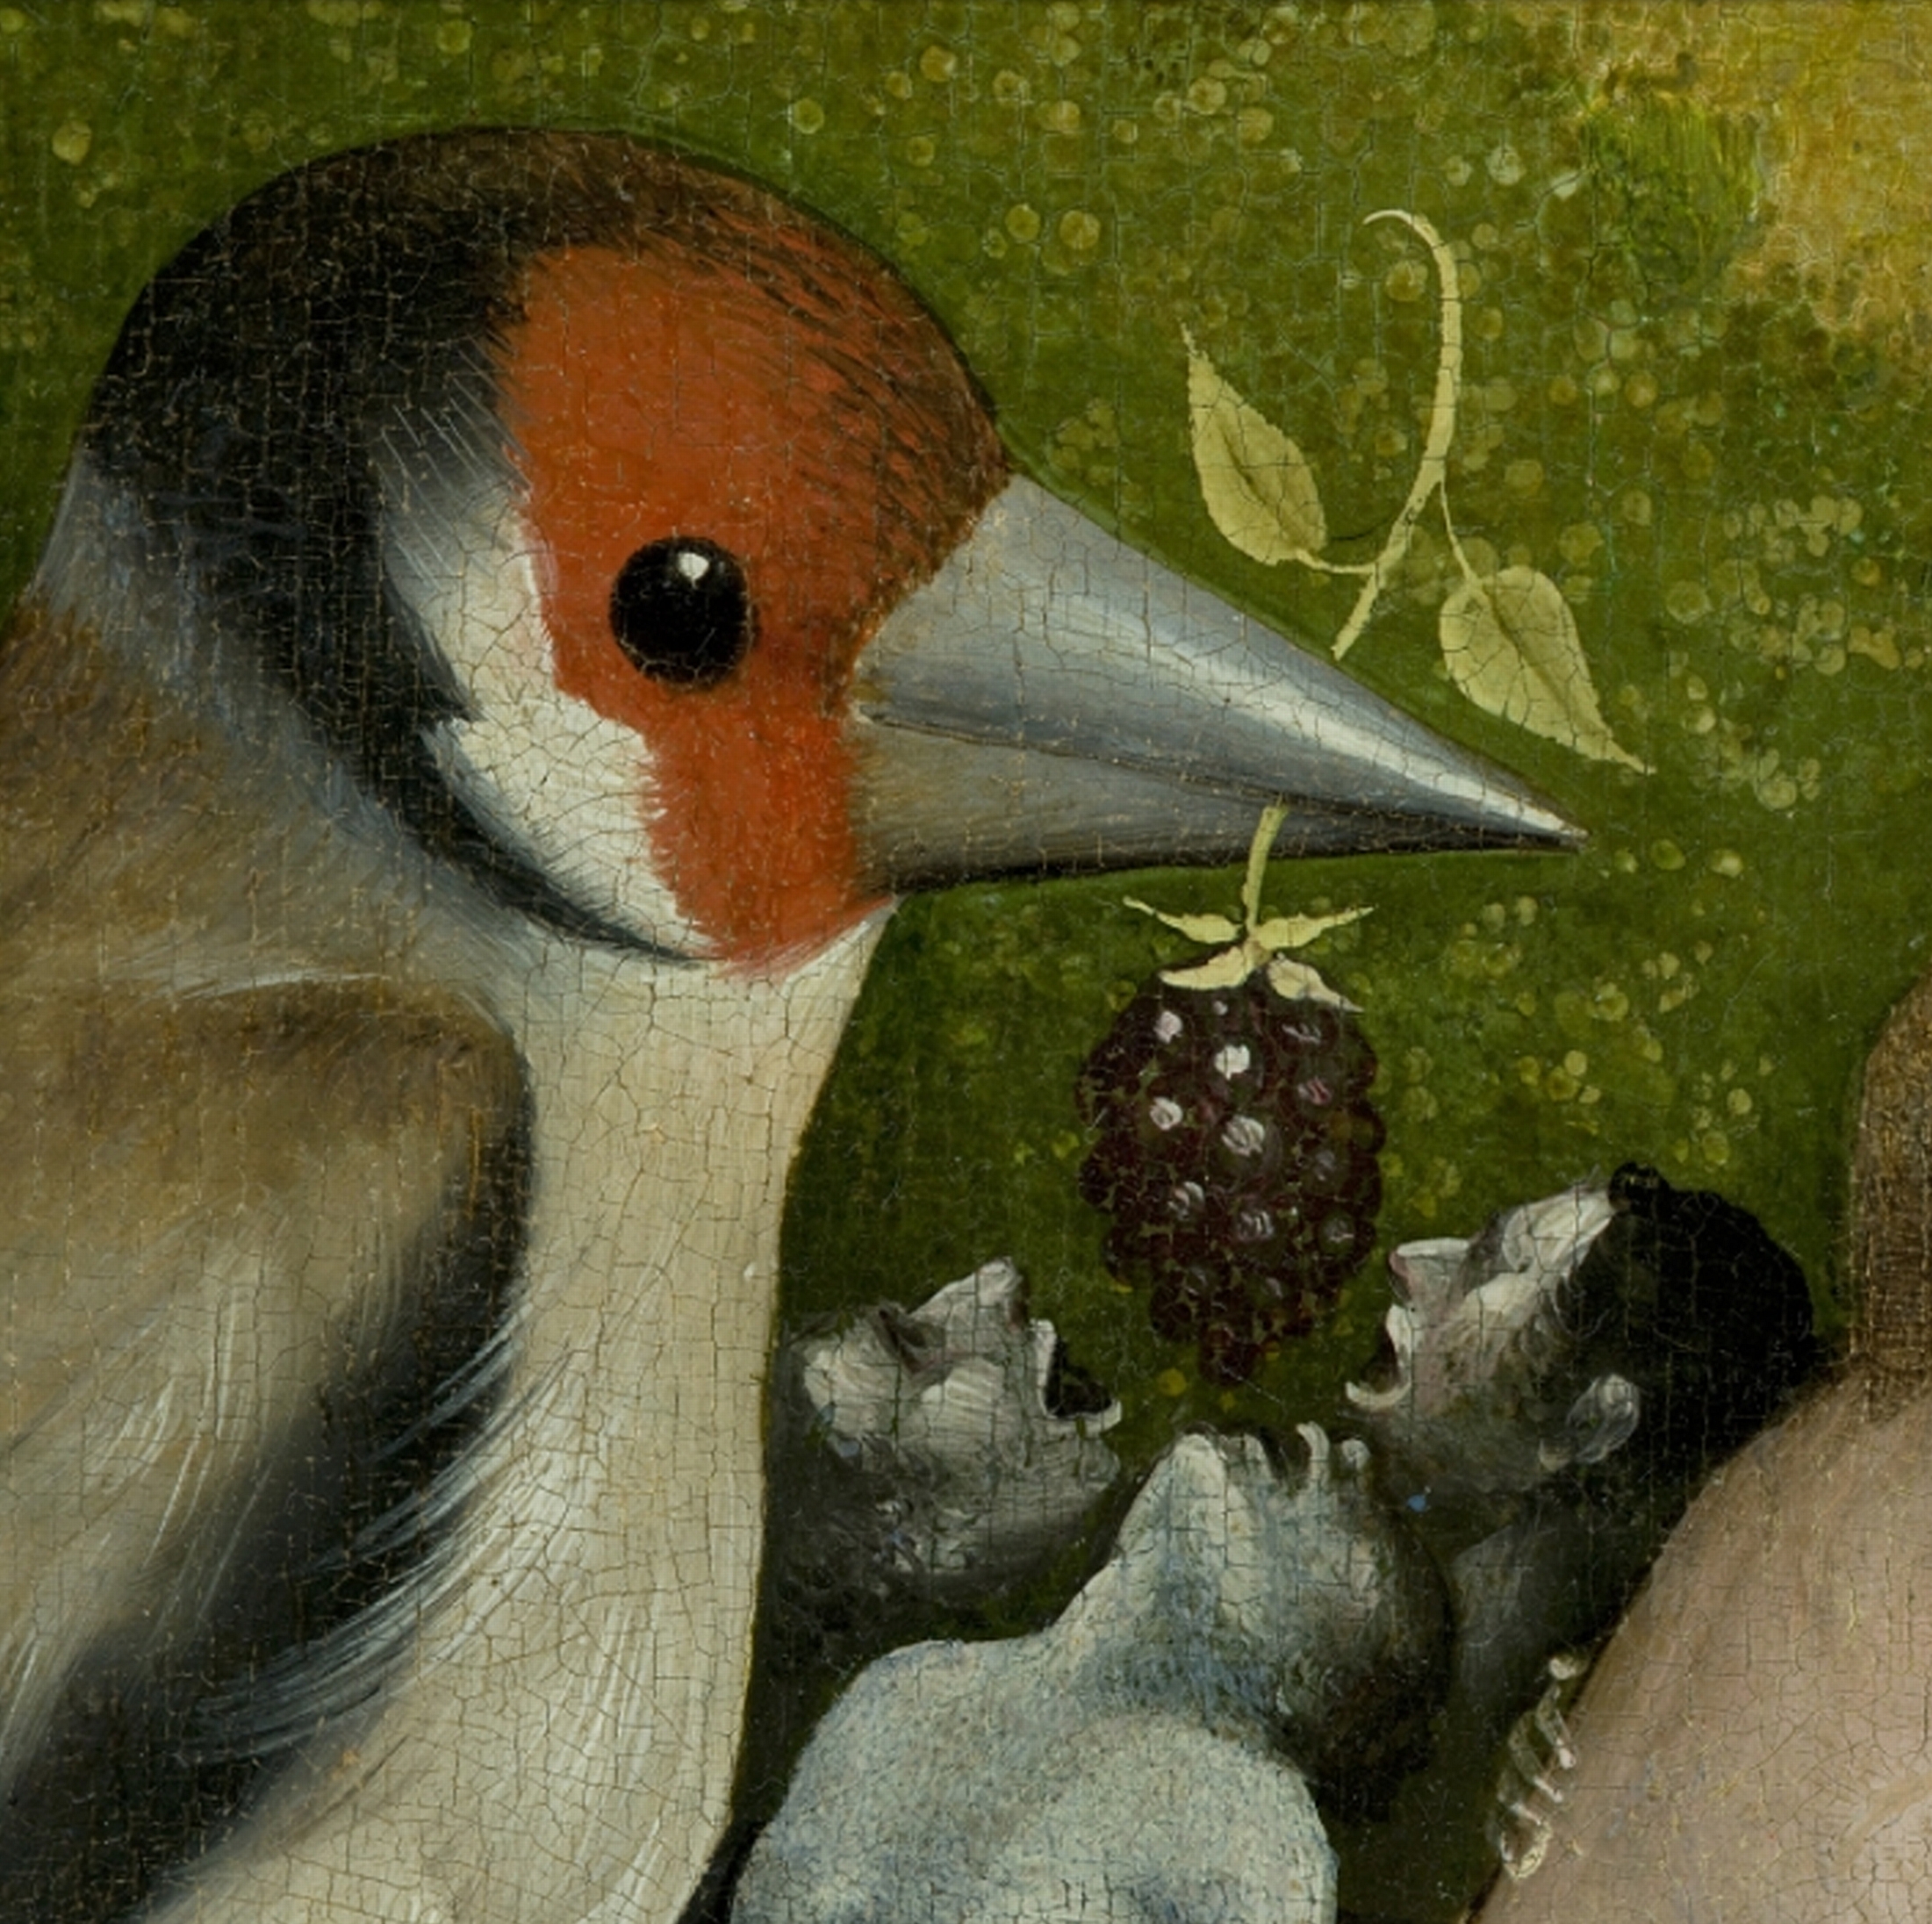 File:Bosch, Hieronymus - The Garden of Earthly Delights, central panel -  Detail left bird feeding men.jpg - Wikimedia Commons